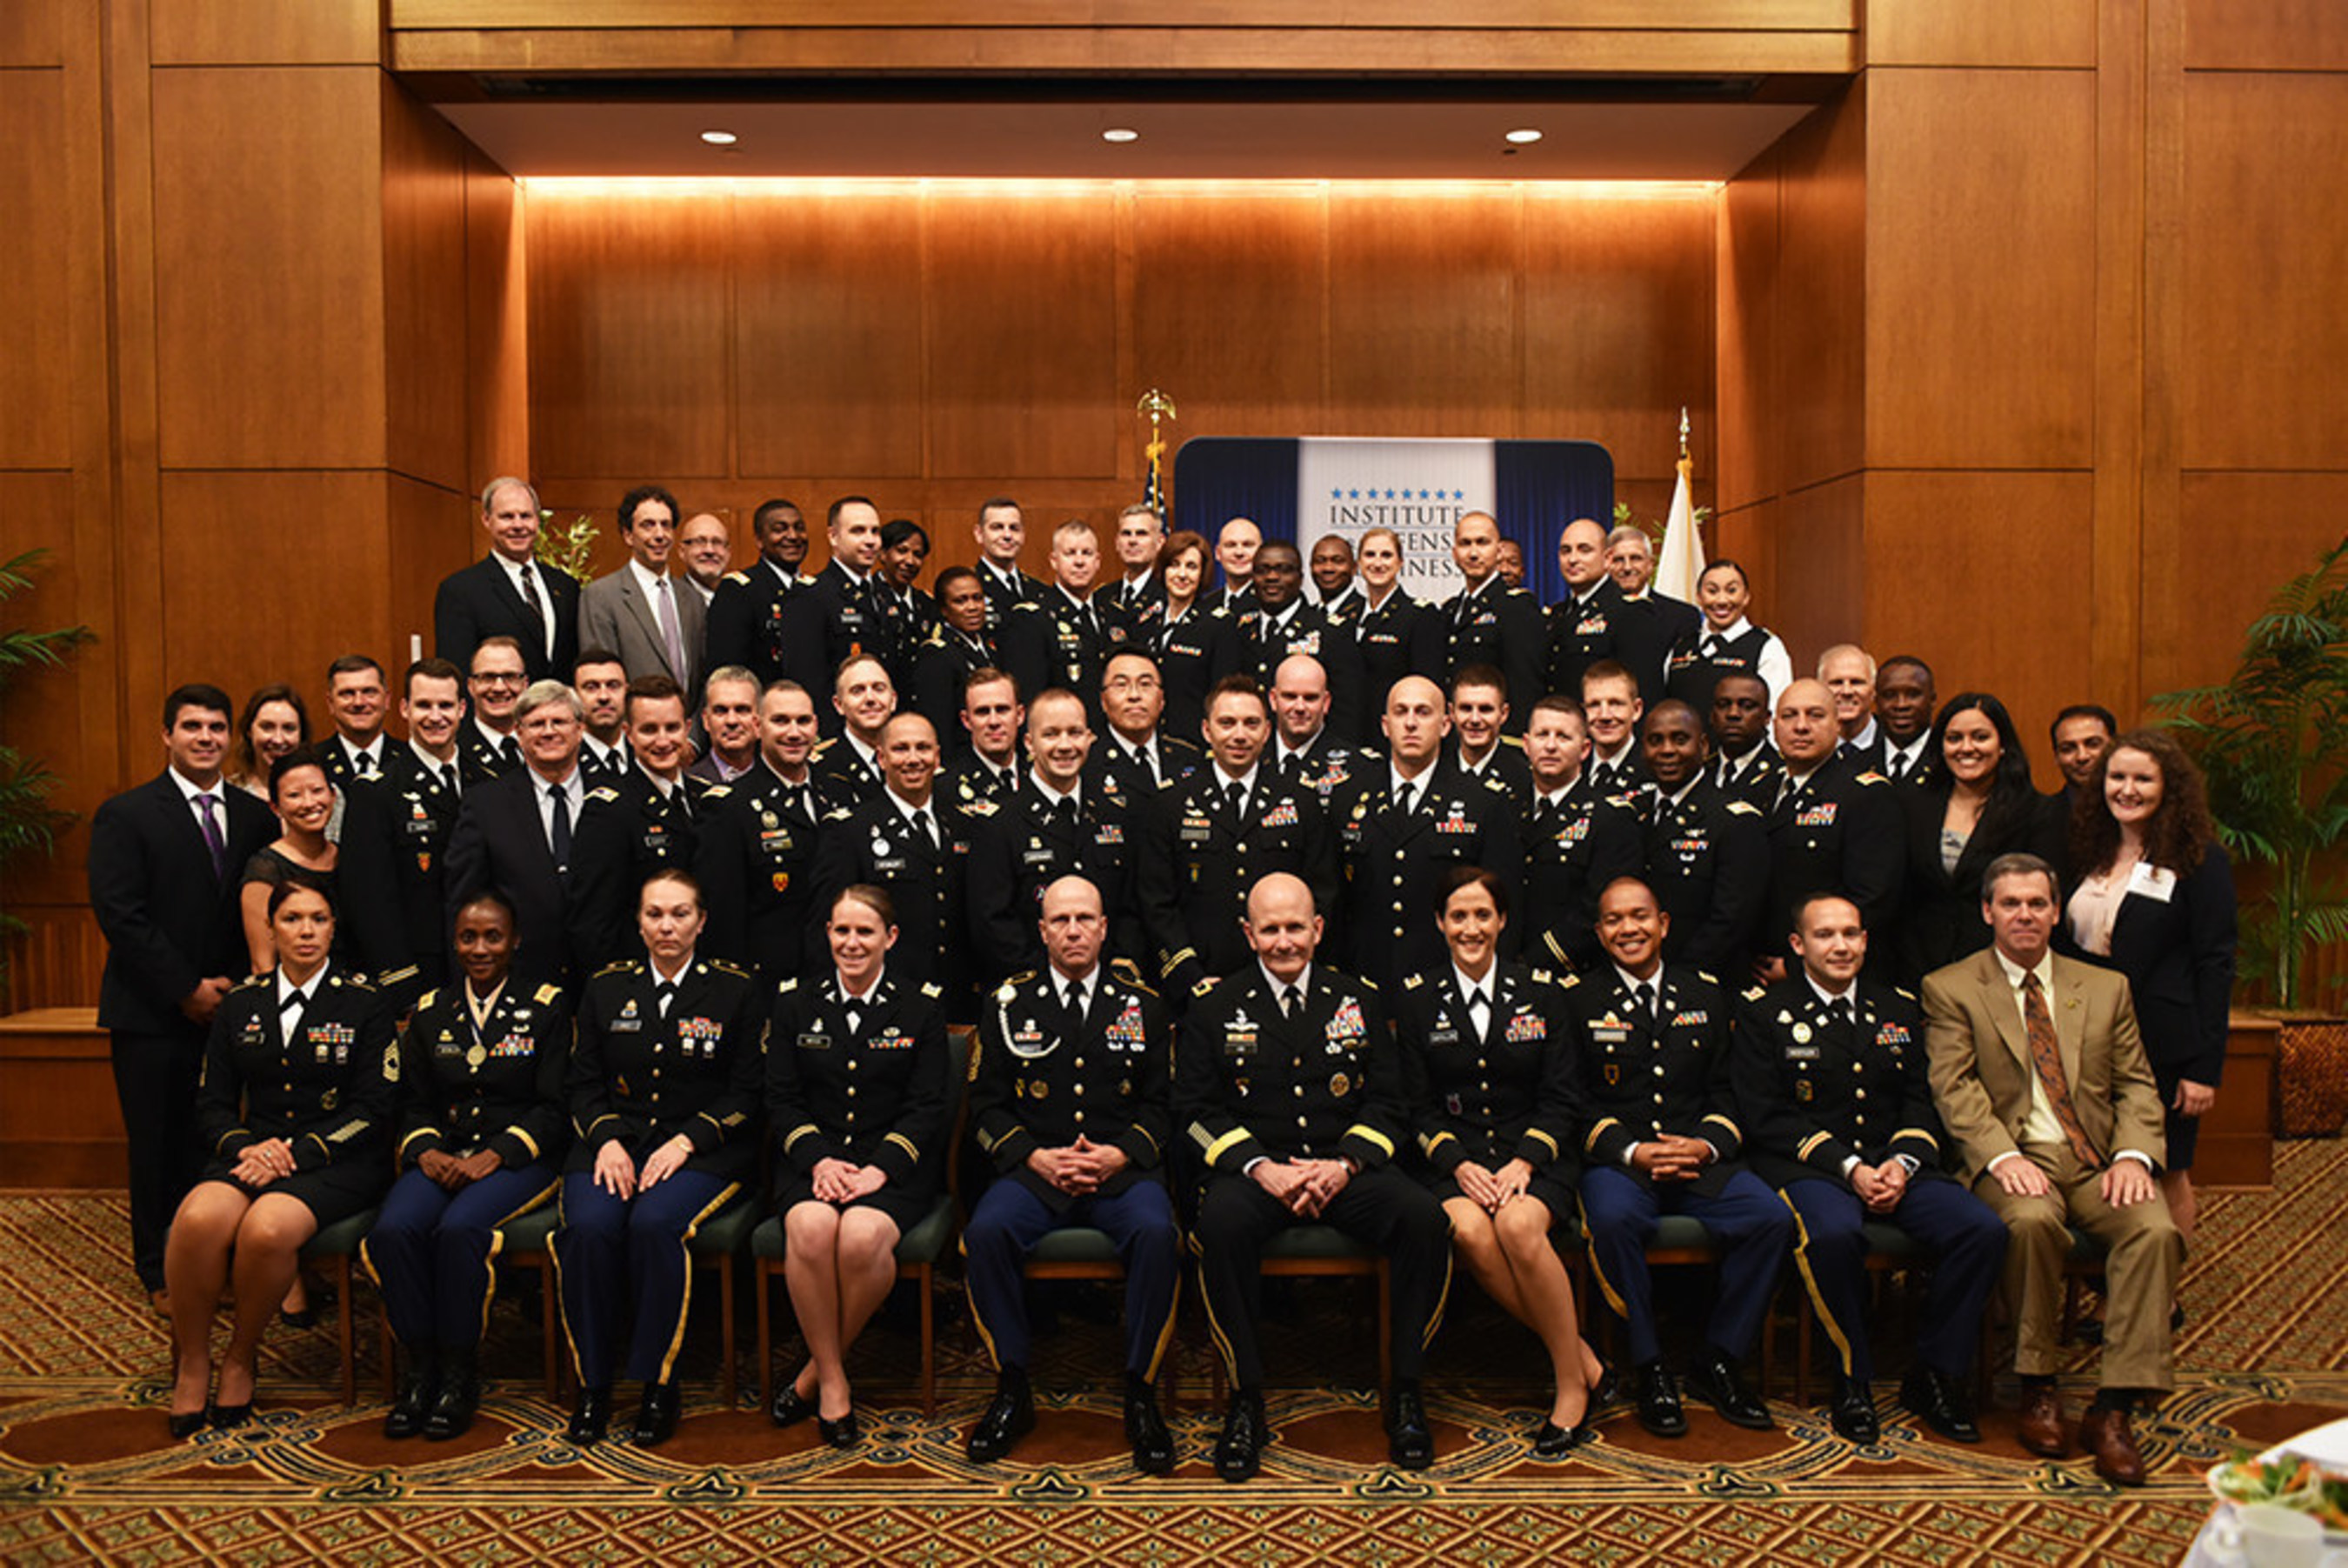 2016 UNC-IDB Strategic Studies Fellows Program graduates pose with Major General (MG) William Hix, Director of Strategy, Plans and Policy, Deputy Chief of Staff G-3/5/7, Headquarters for the Department of the Army.